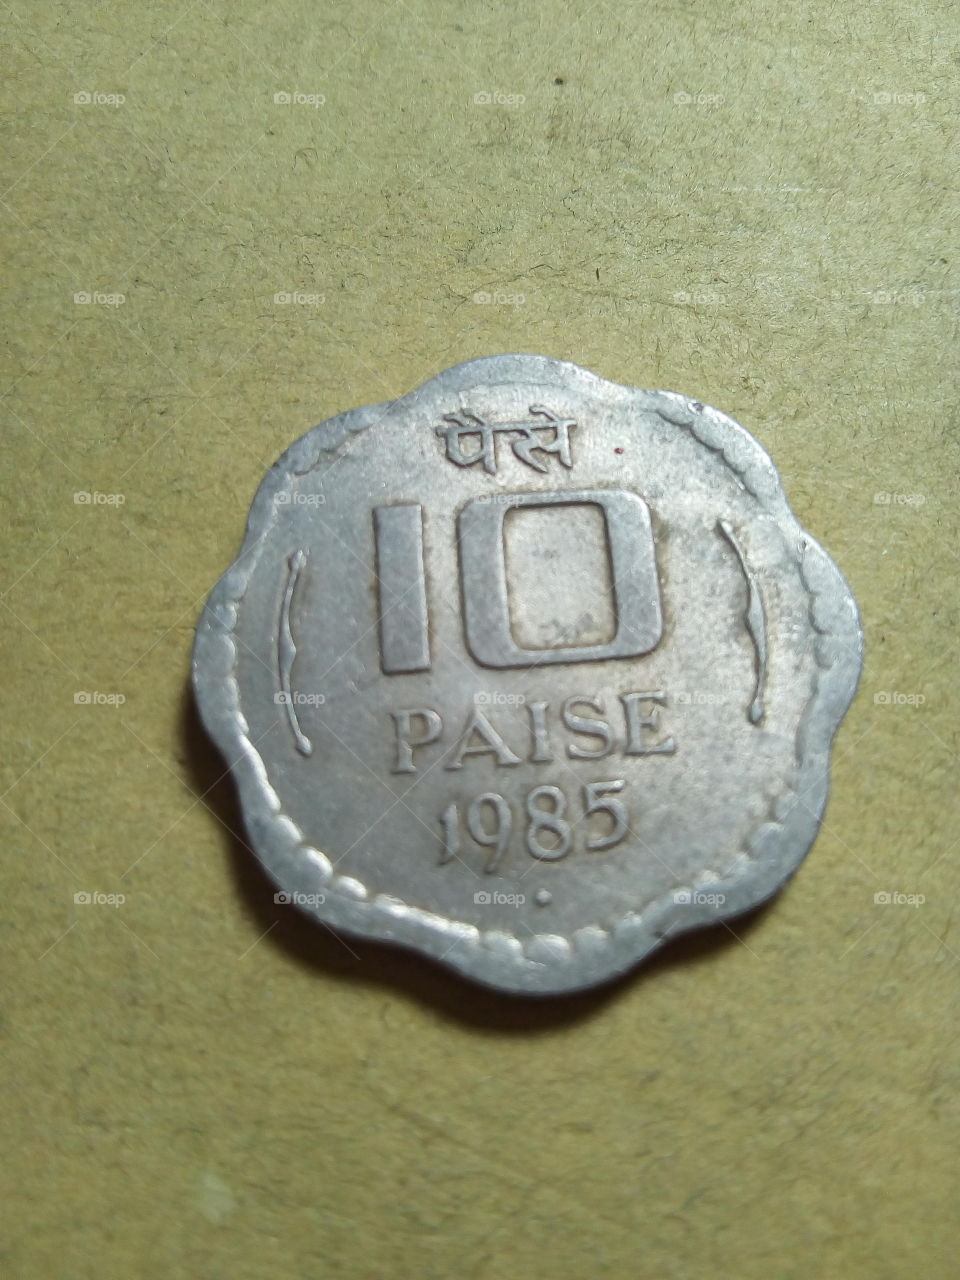 A coin of ten paise- 1/10 share of Indian Rupee issued by Government of India in 1985.